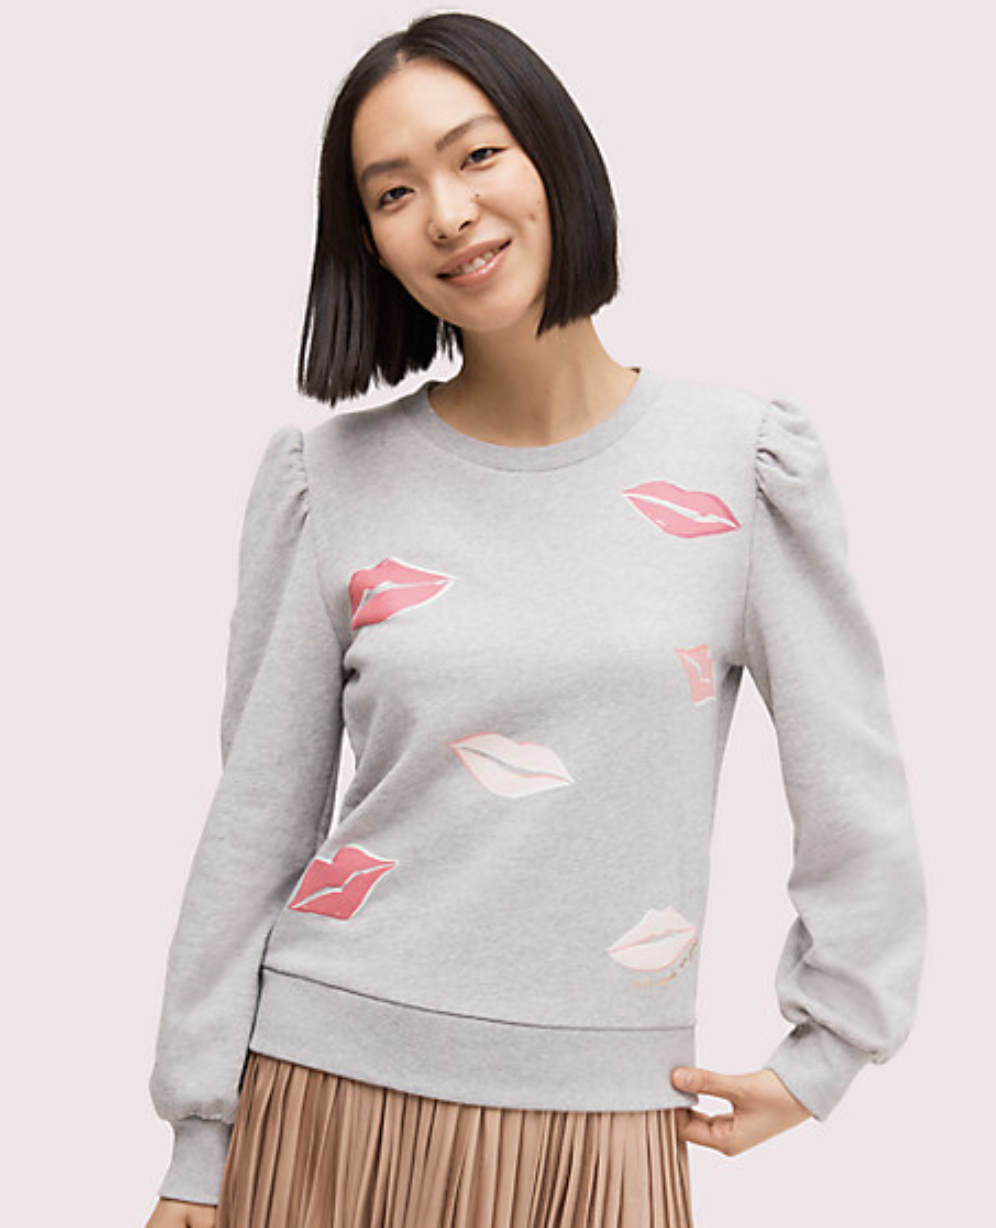 Model wearing grey sweatshirt with puff sleeves and different shades of pink lips around the bodice